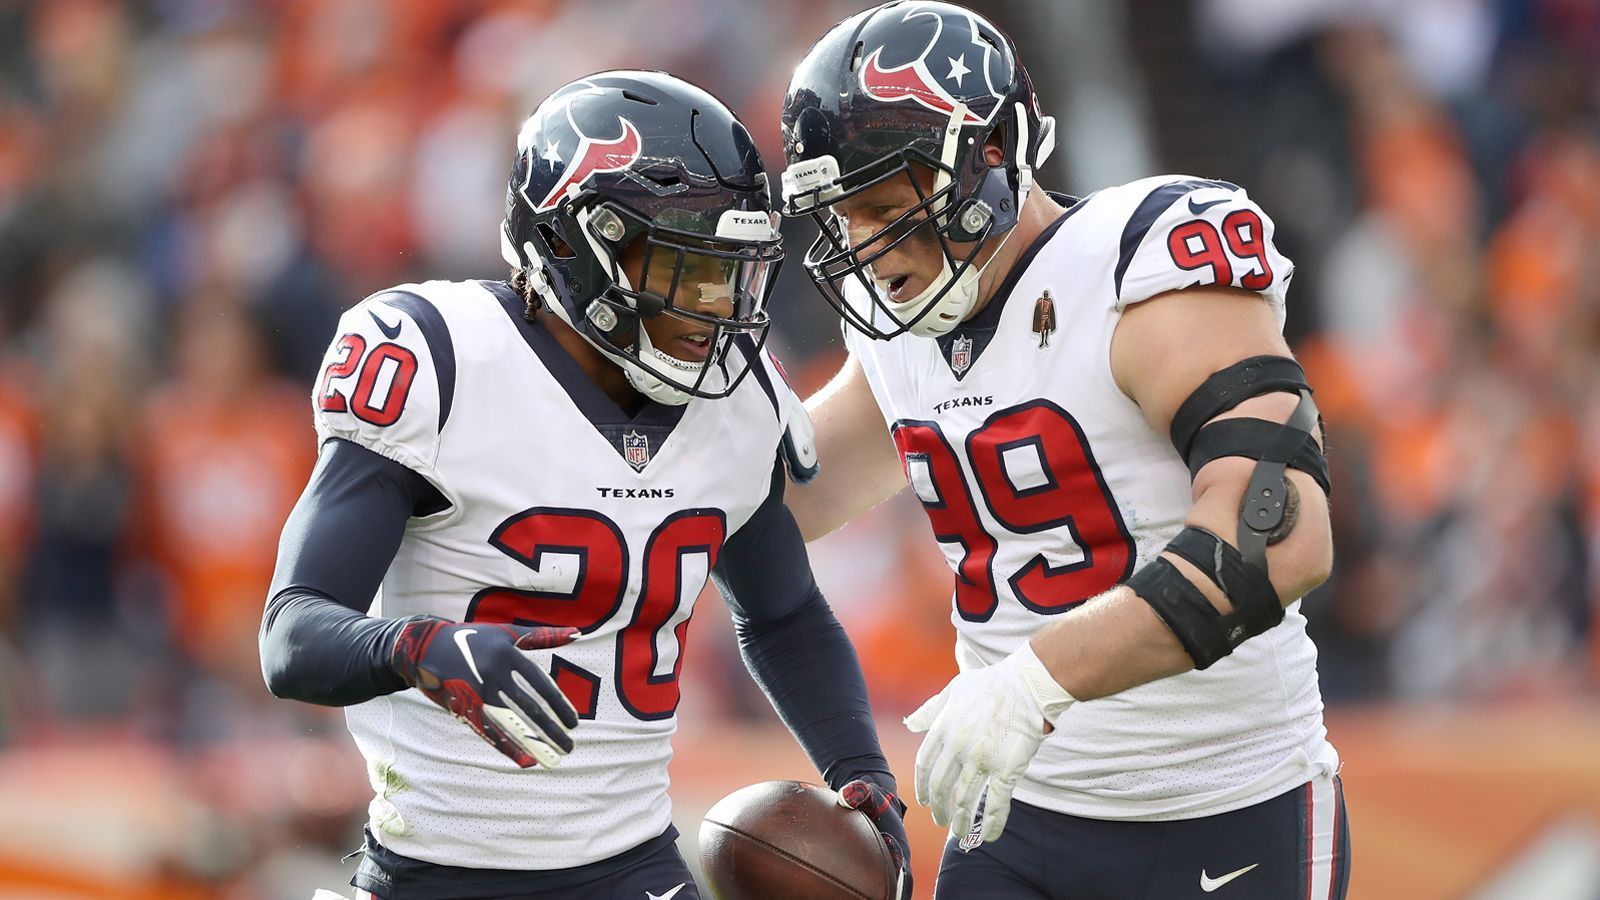 
                <strong>Houston Texans (8-3)</strong><br>
                Week 13: vs. Browns (4-6-1)Week 14: vs. Colts (6-5)Week 15: at Jets (3-8)Week 16: at Eagles (5-6)Week 17: at Jaguars (3-8)
              